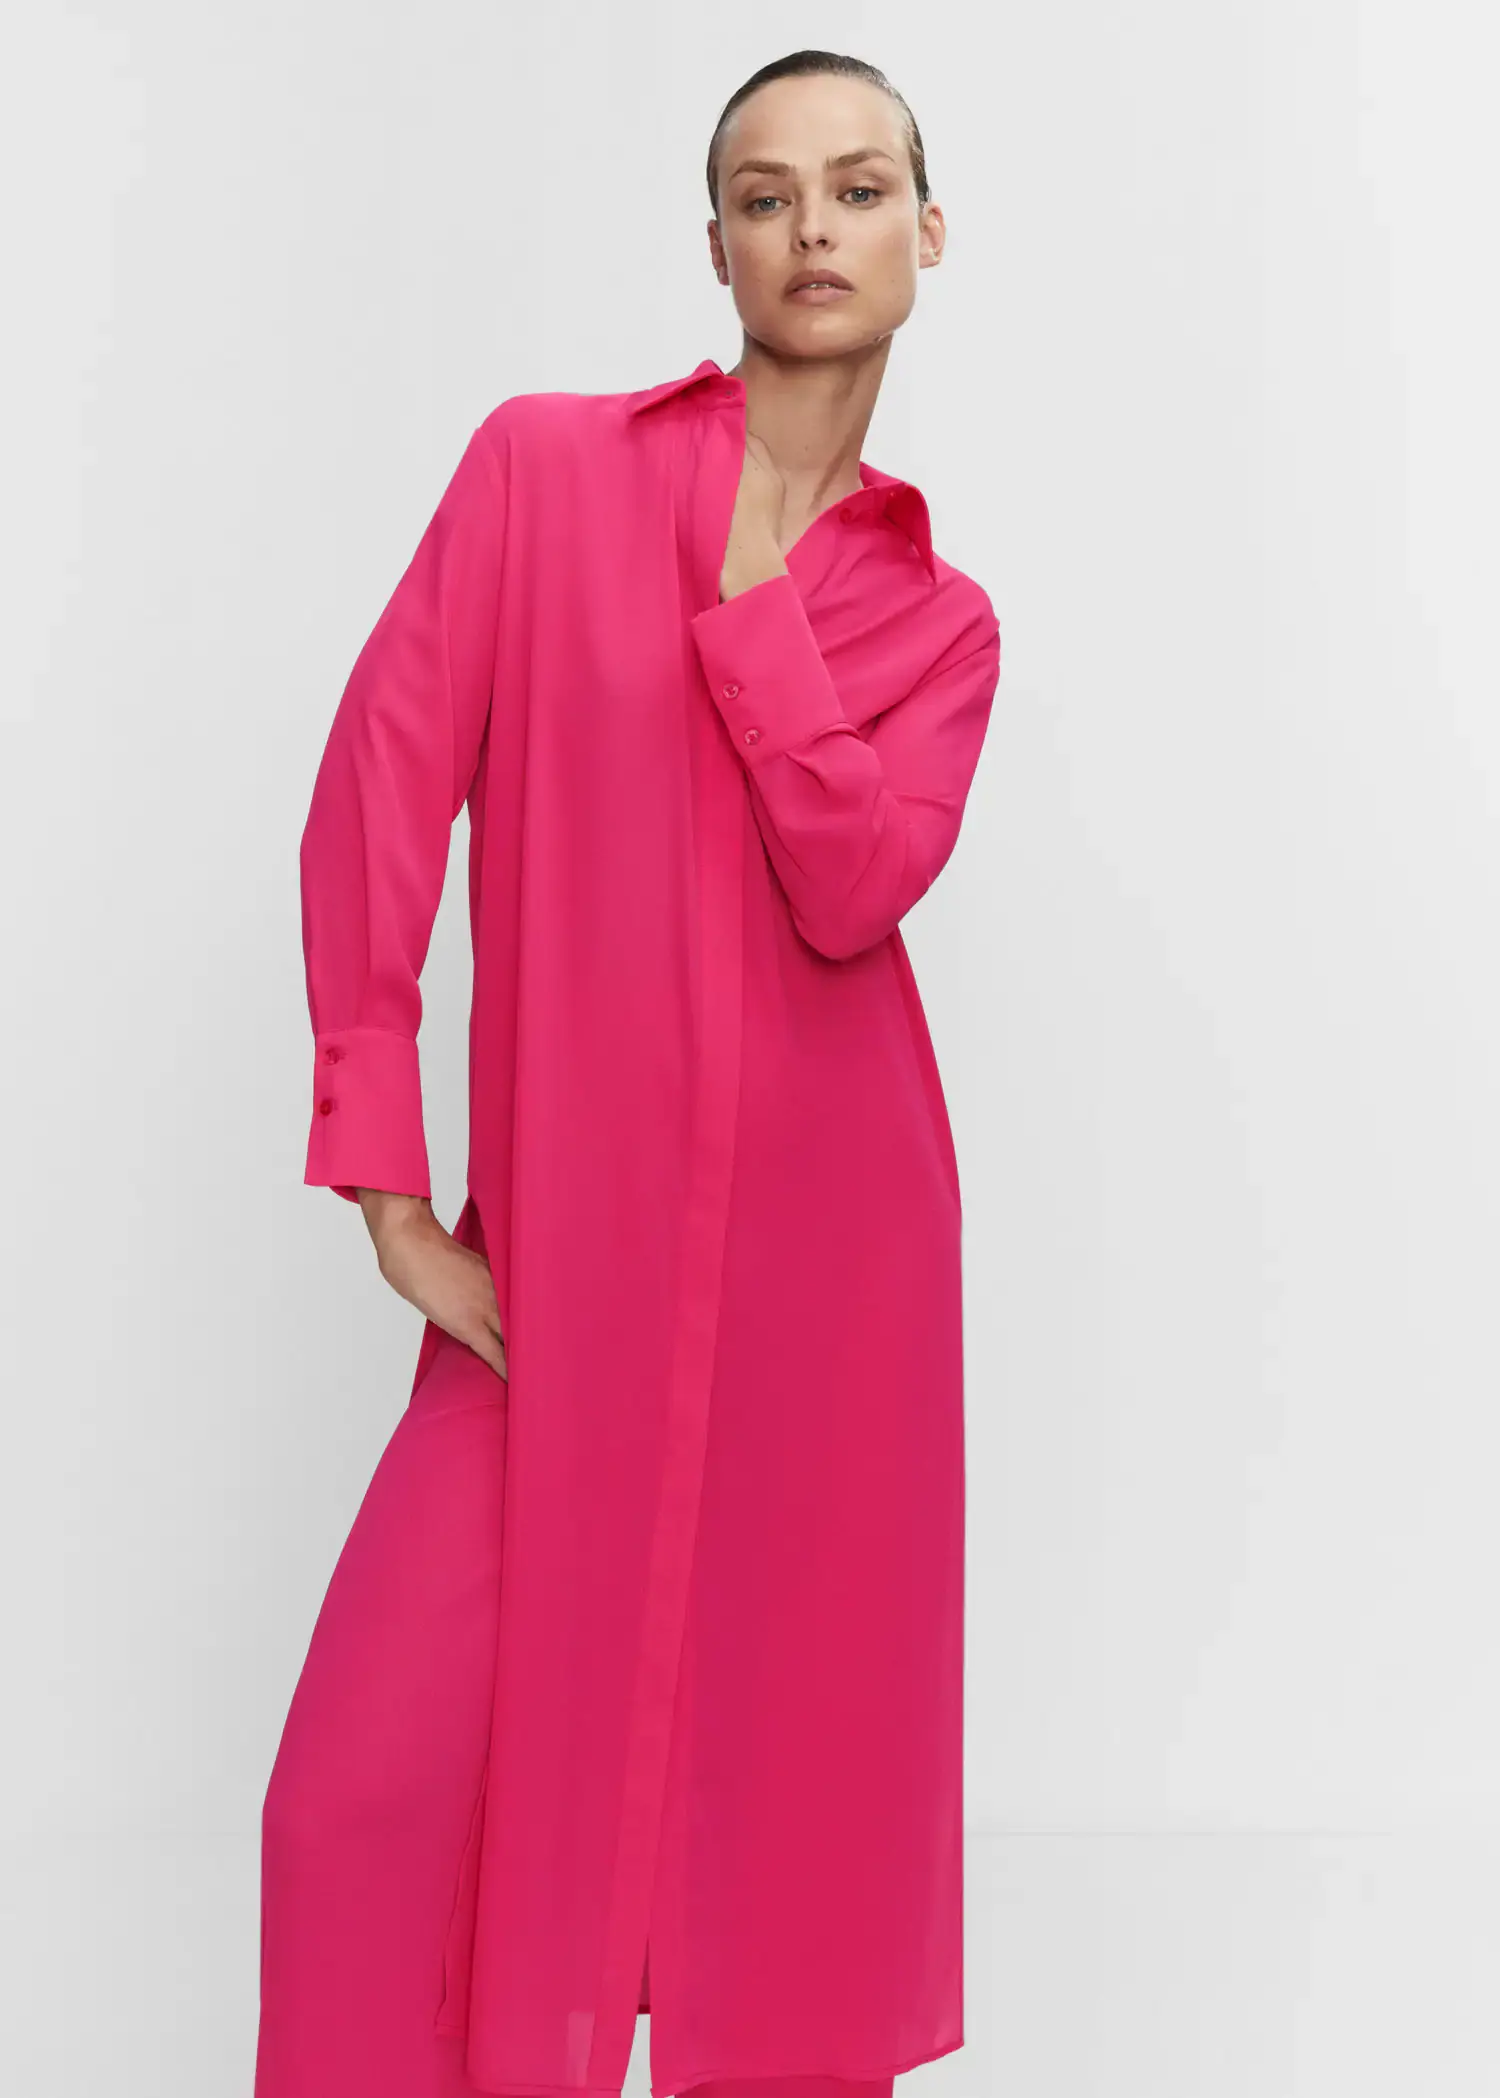 Mango Shirt dress with slits. a woman in a pink dress is posing. 